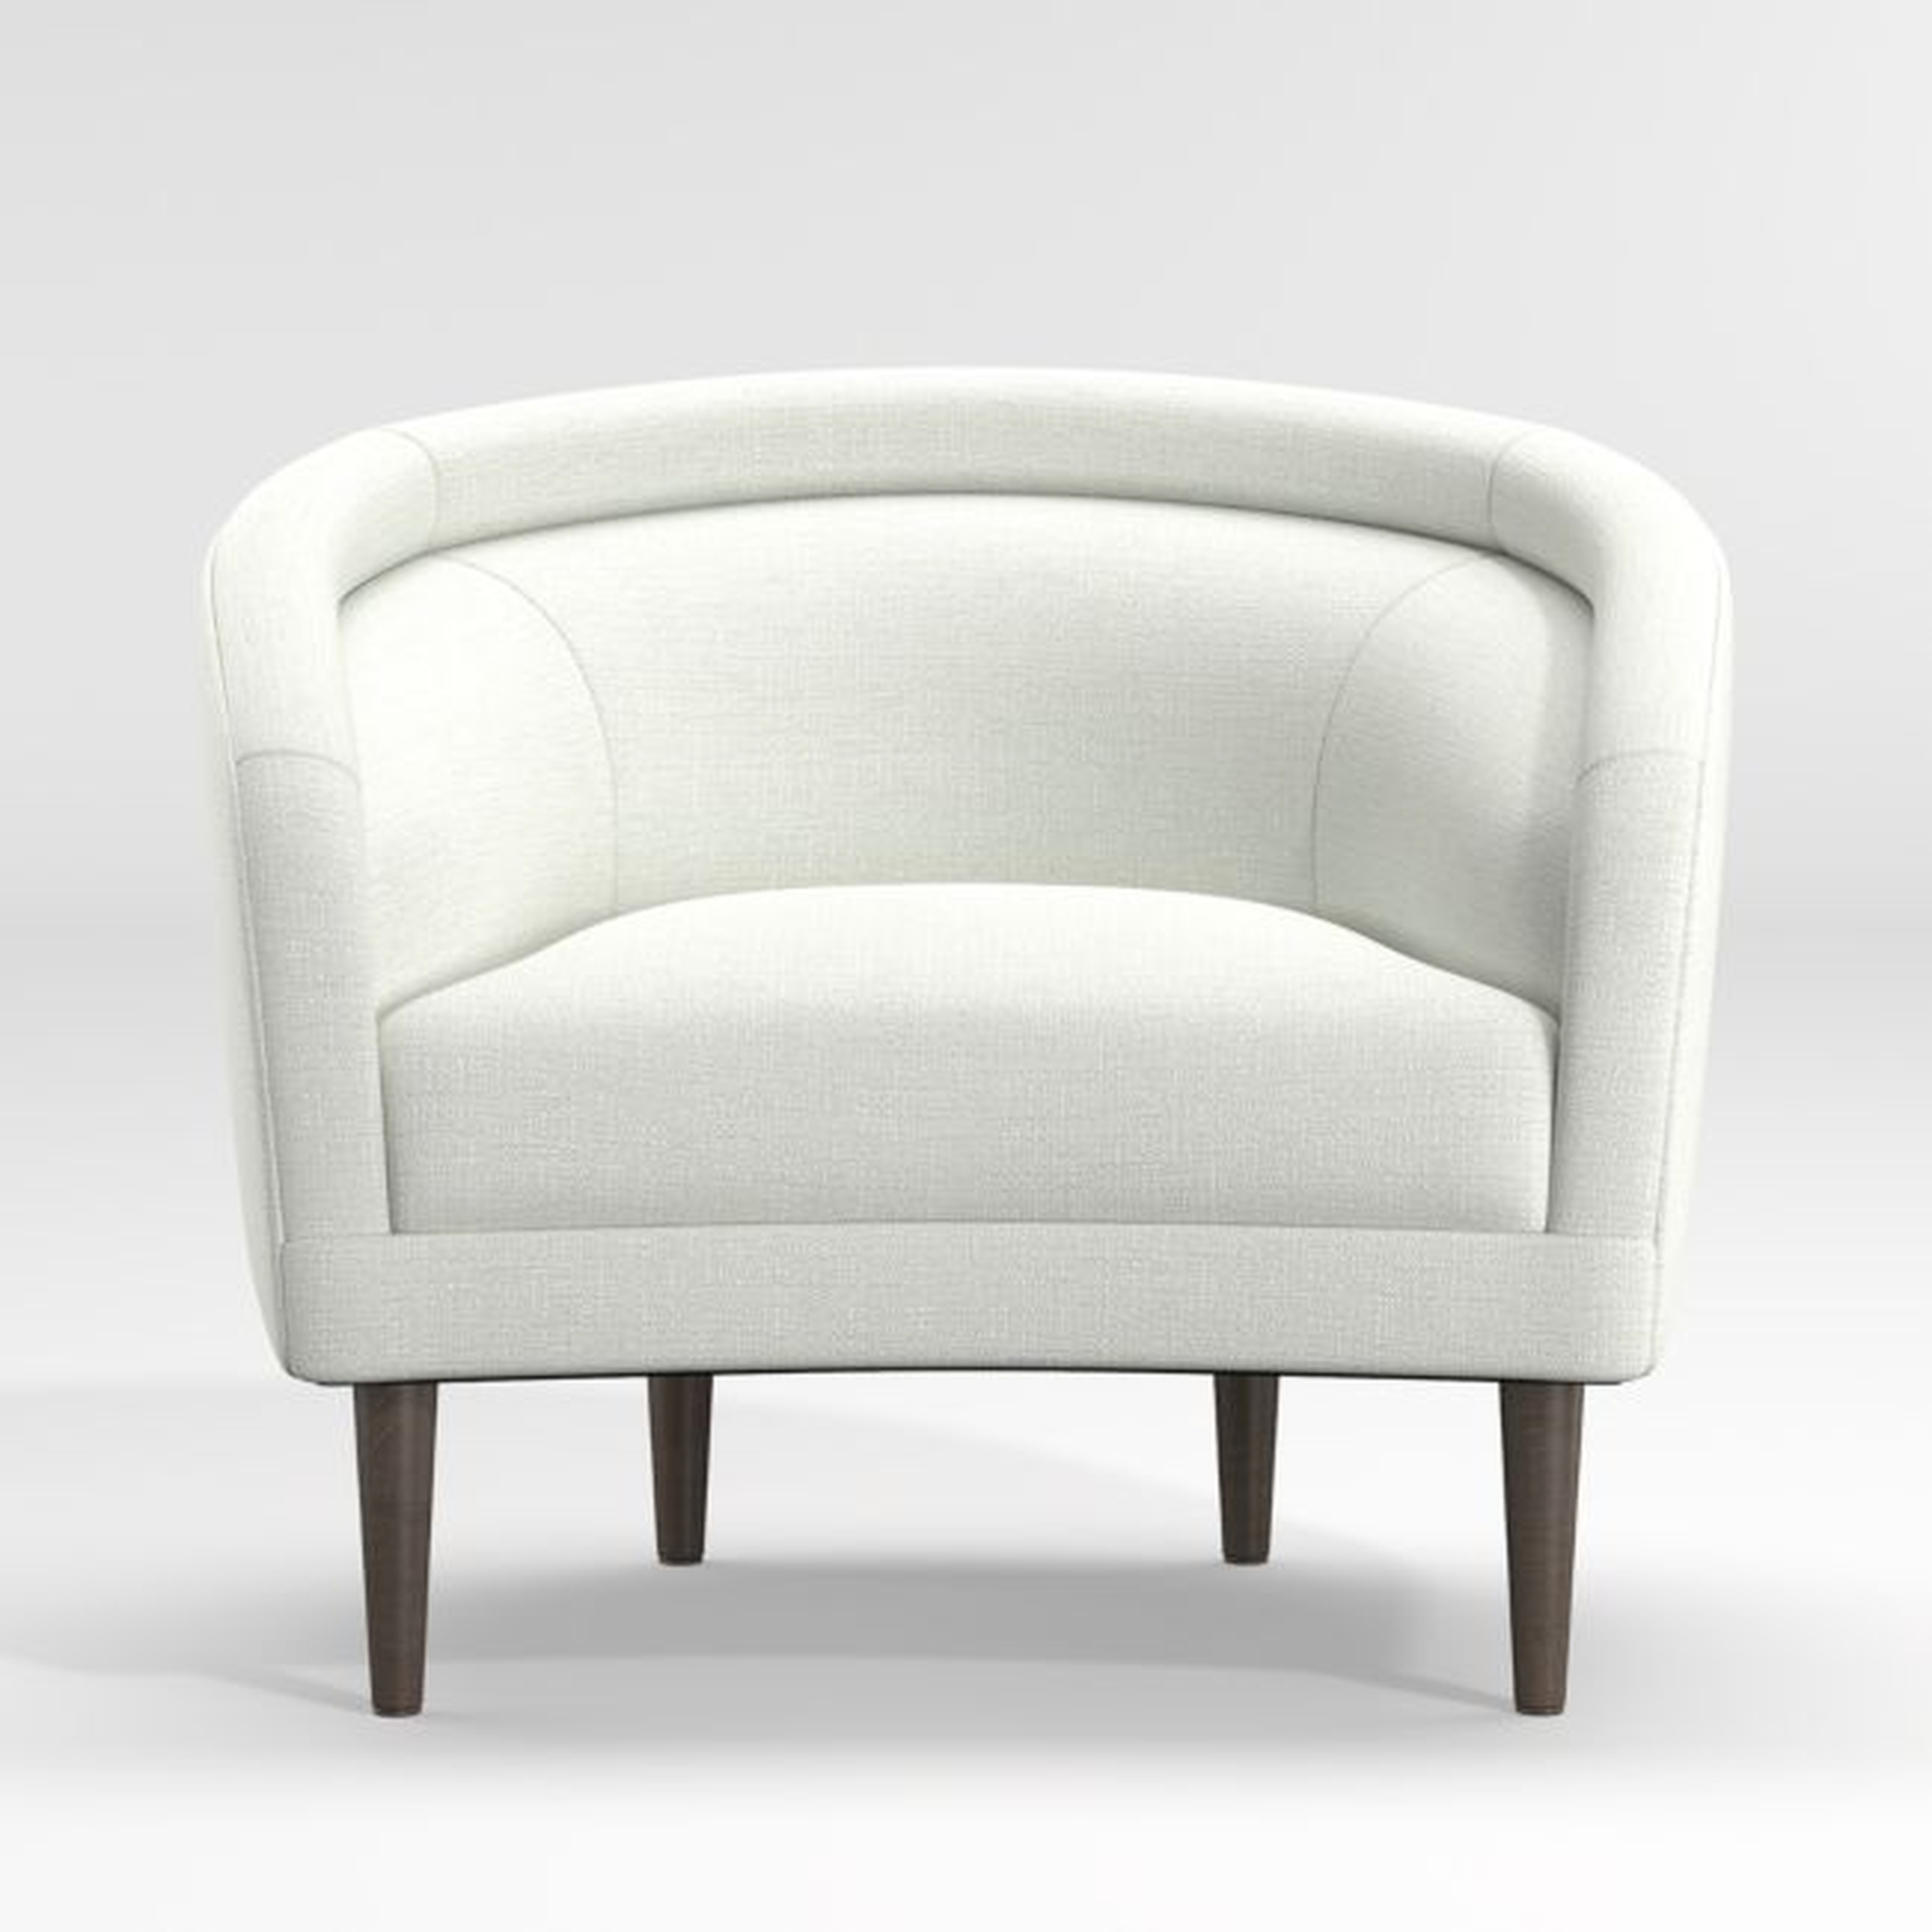 Josephine Chair - Crate and Barrel